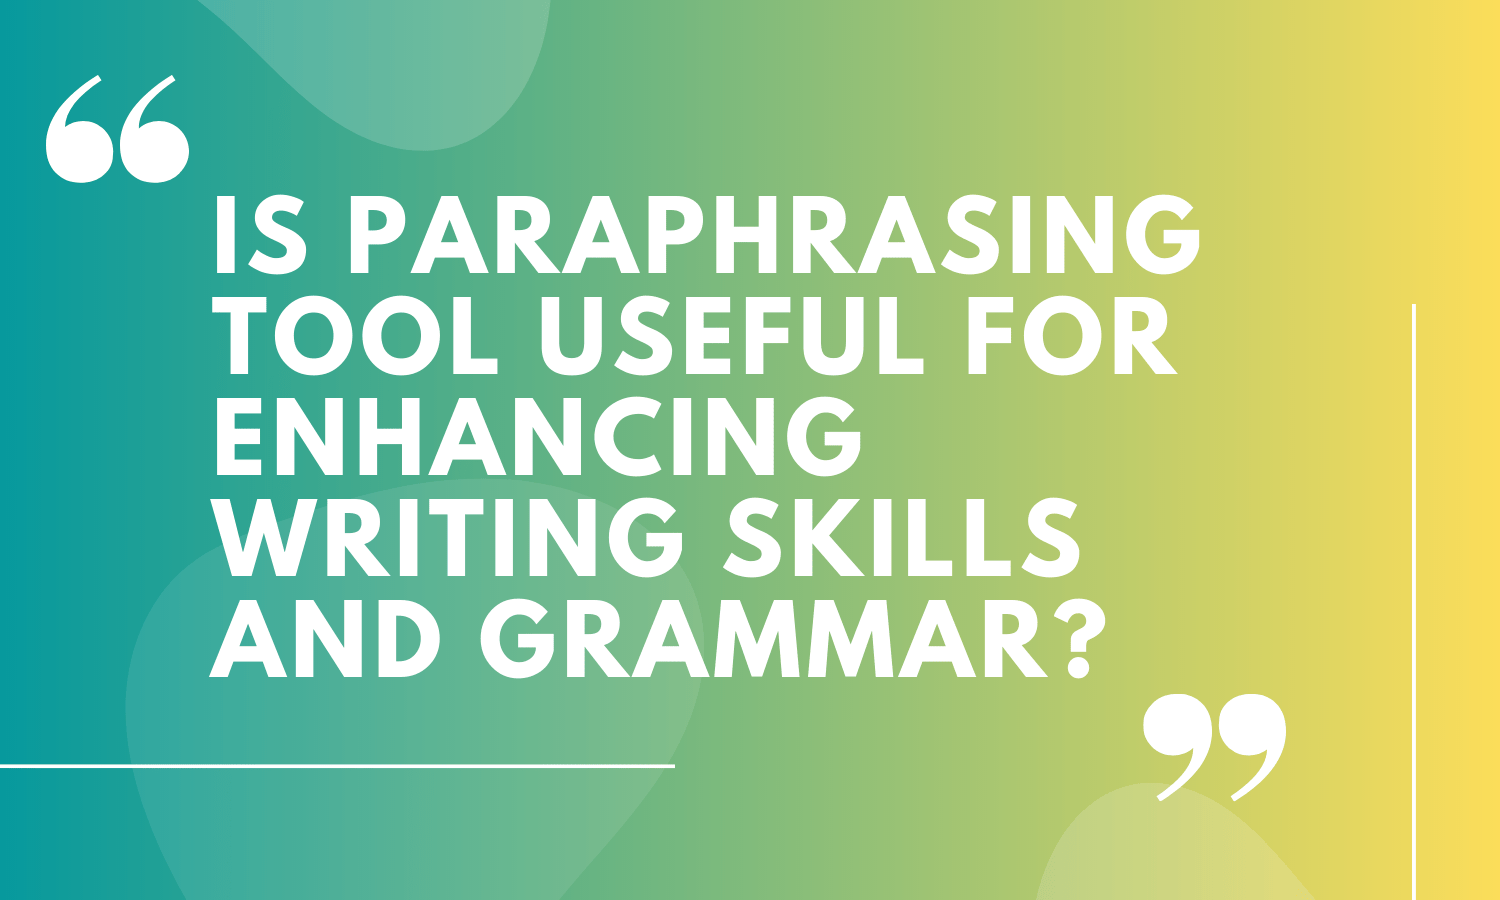 Is paraphrasing tool useful for enhancing writing skills and grammar